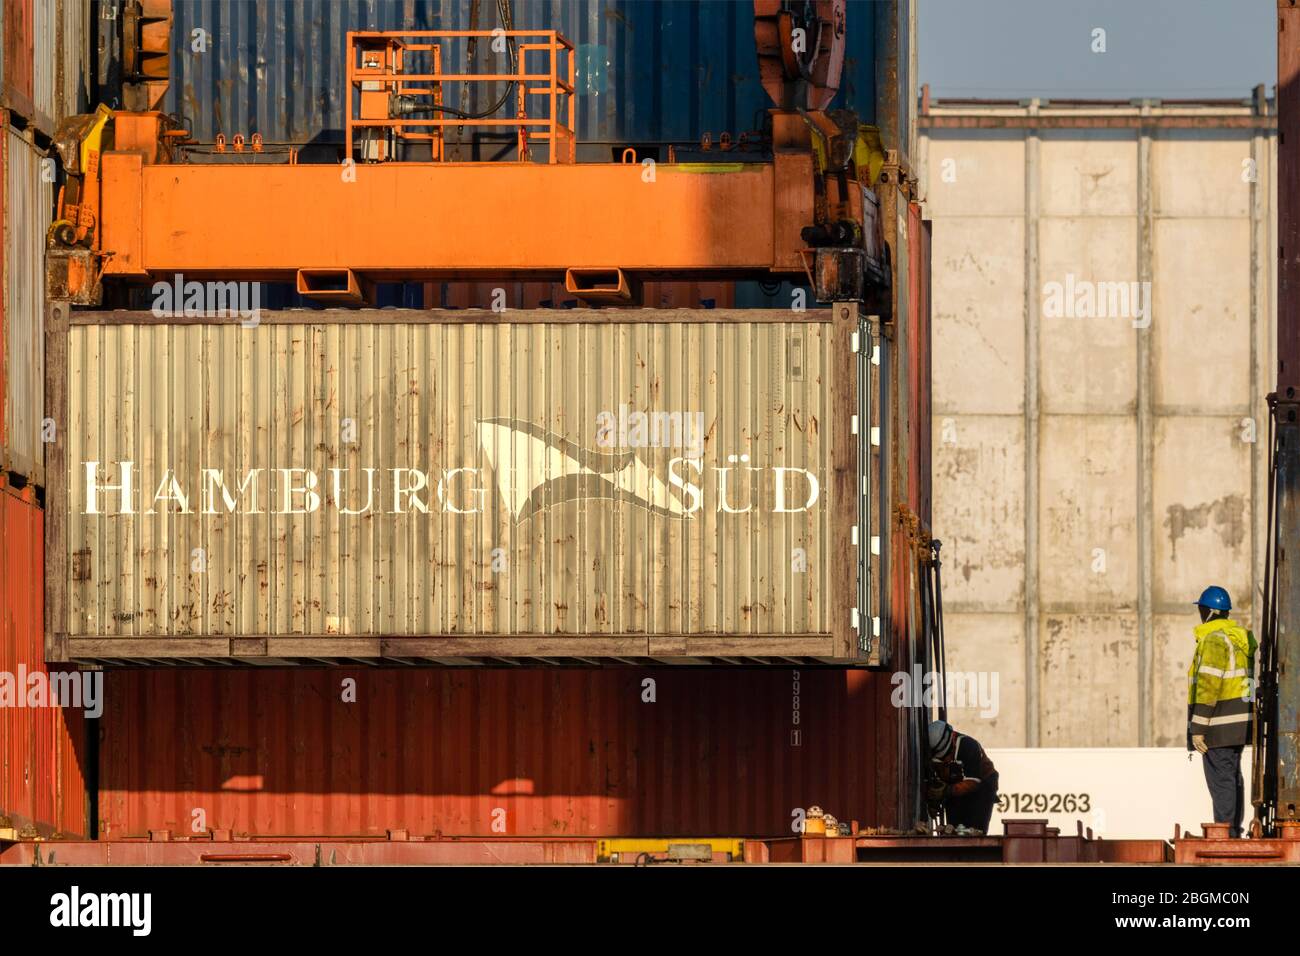 Unloading containers with the Hamburg Sud logo on board Stock Photo